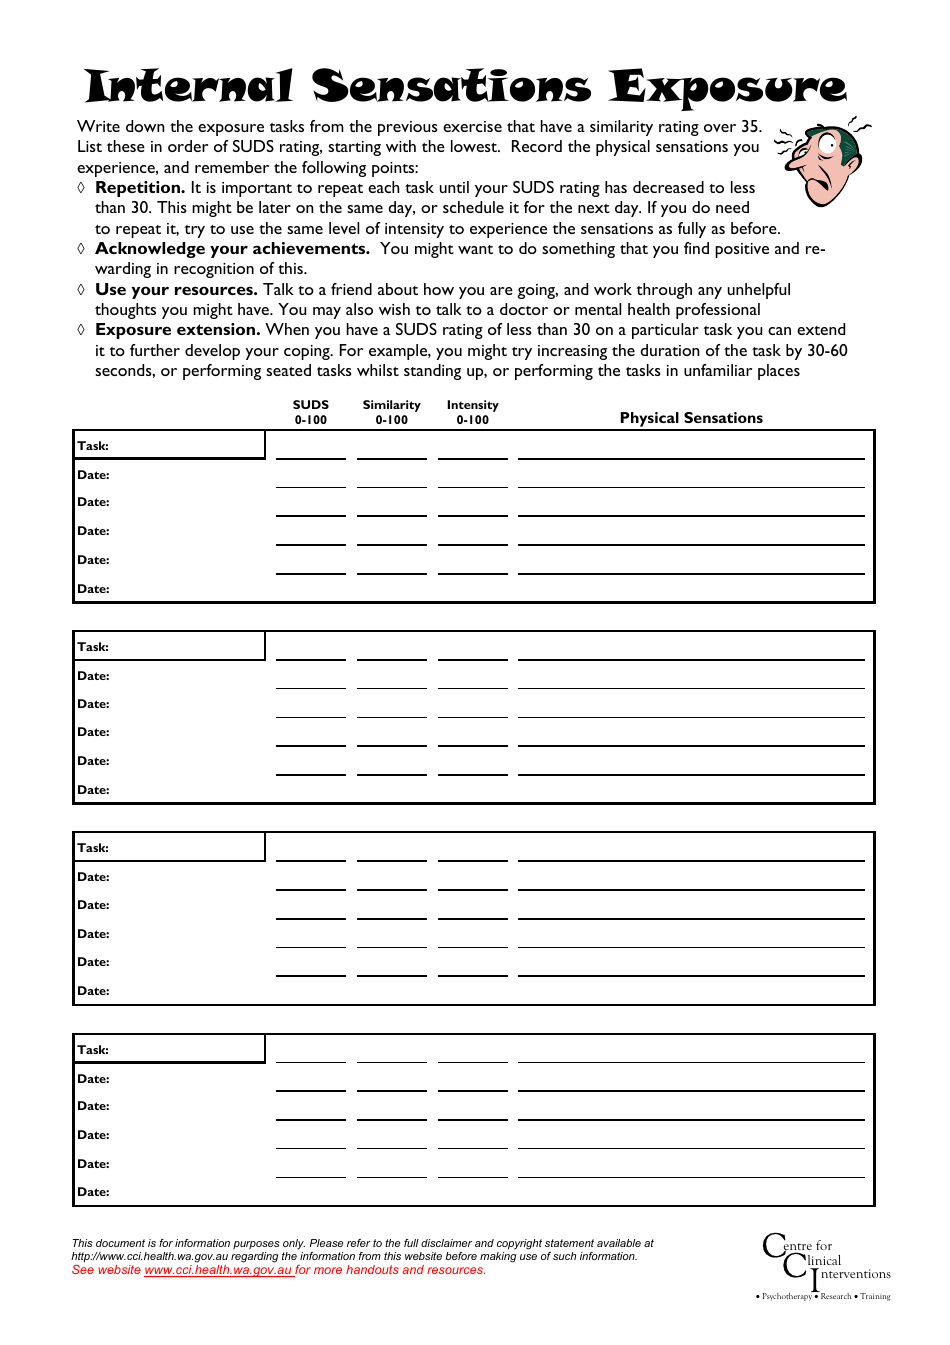 Internal Sensations Exposure Template - Centre for Clinical Interventions